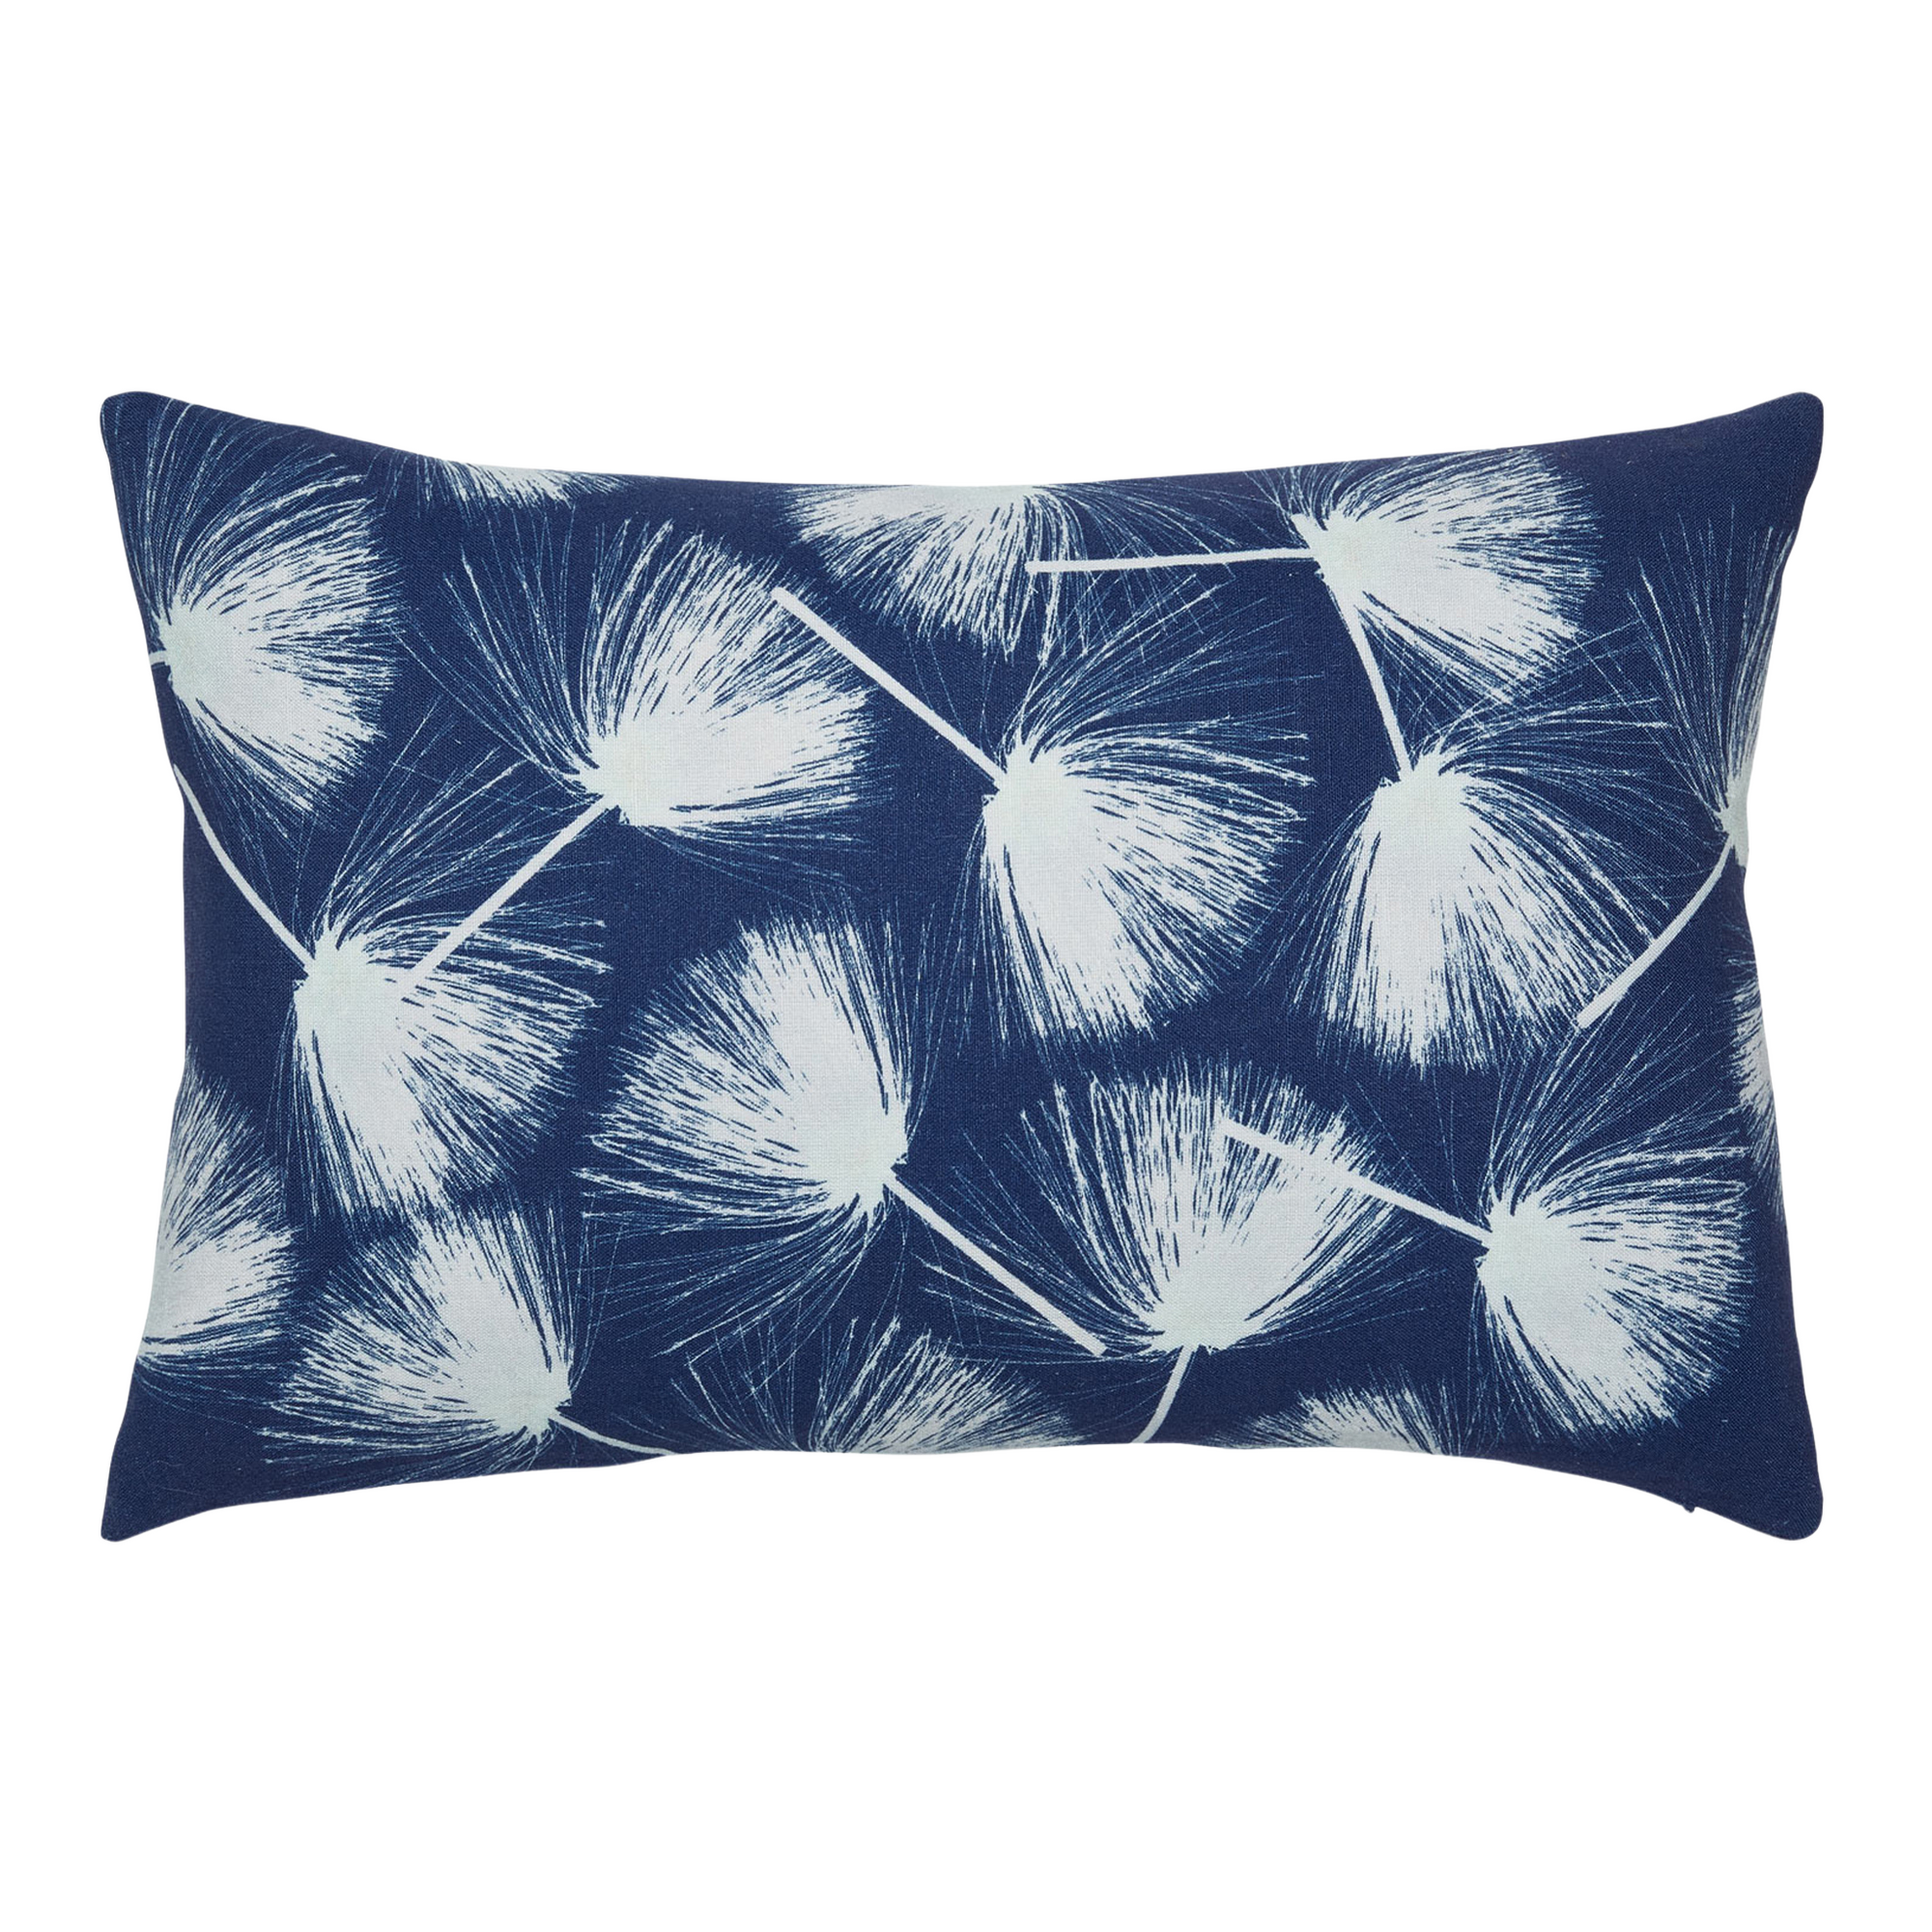 Isbah Pillow Cover